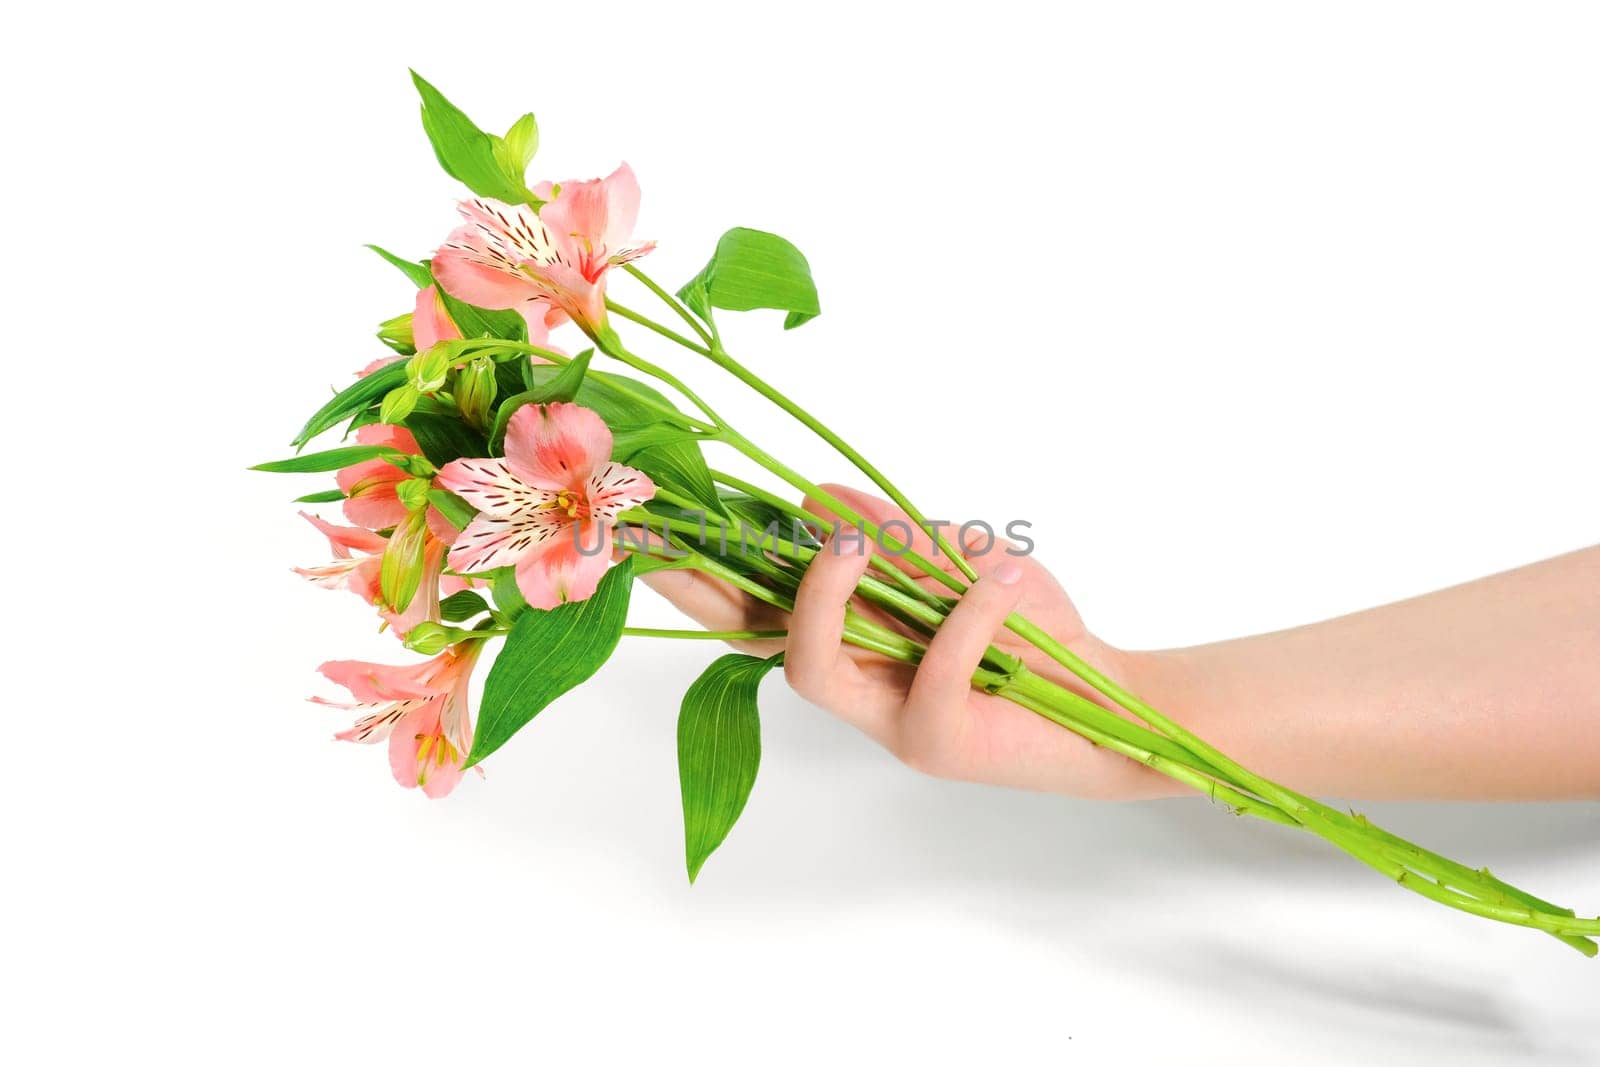 Delicate lily flowers in a female hand on a white background. Natural cosmetics, hand care products. Skin care.